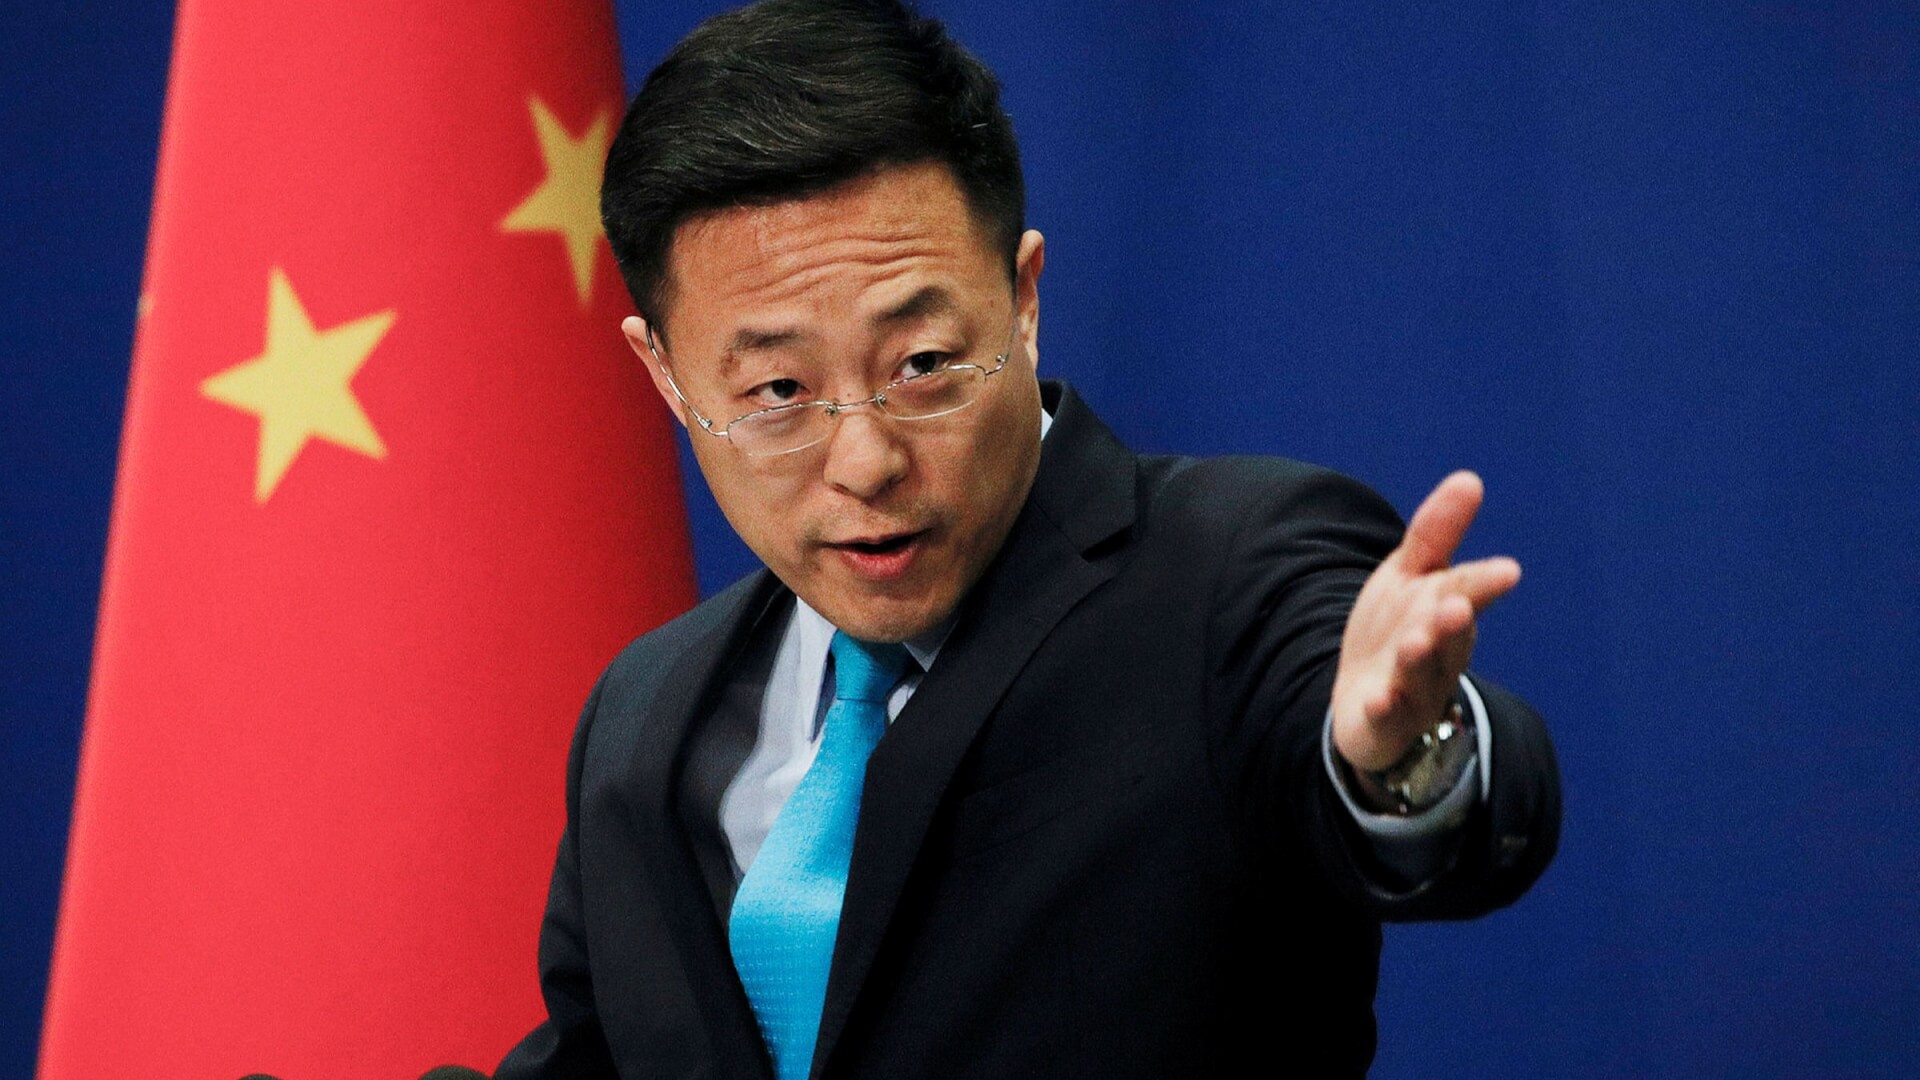  “Avoid Politicising G20,” China Tells India on Planned Summit in J&K